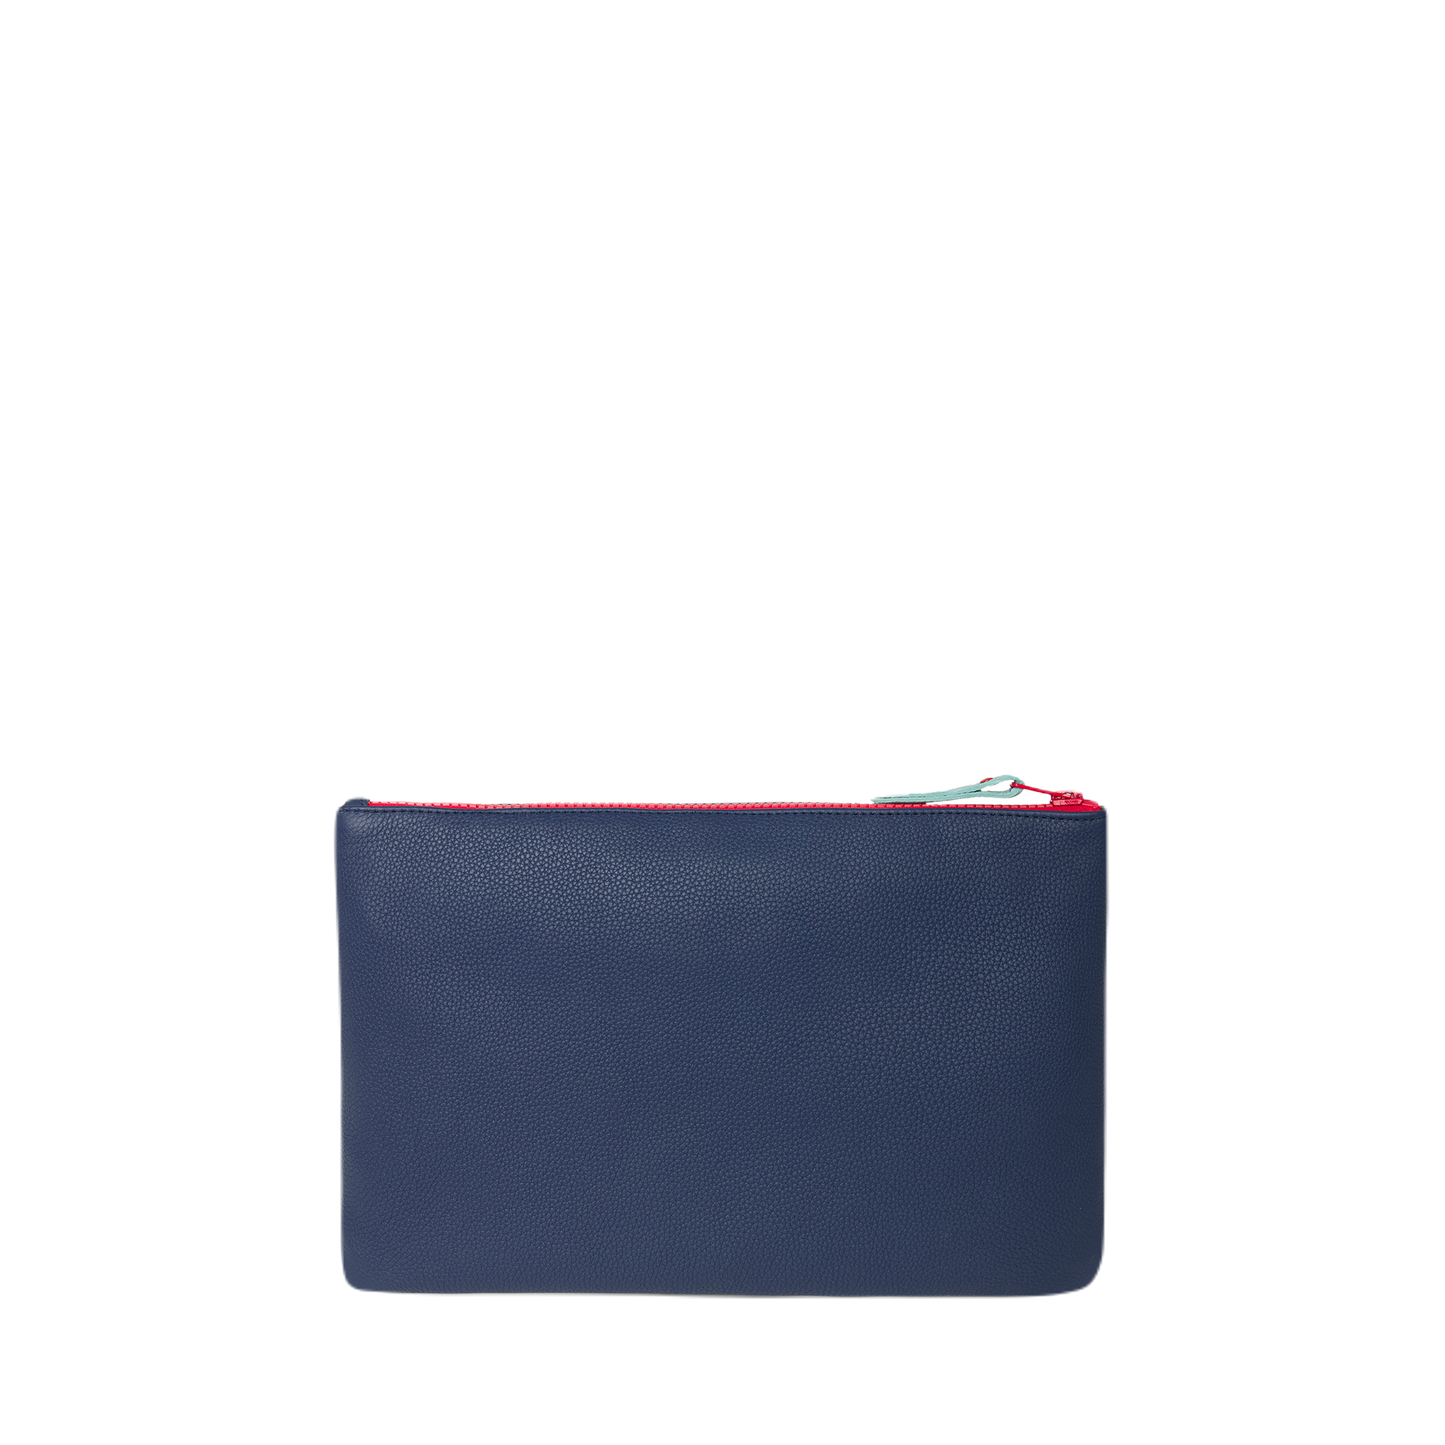 ZIP POUCH Blue Leather - S